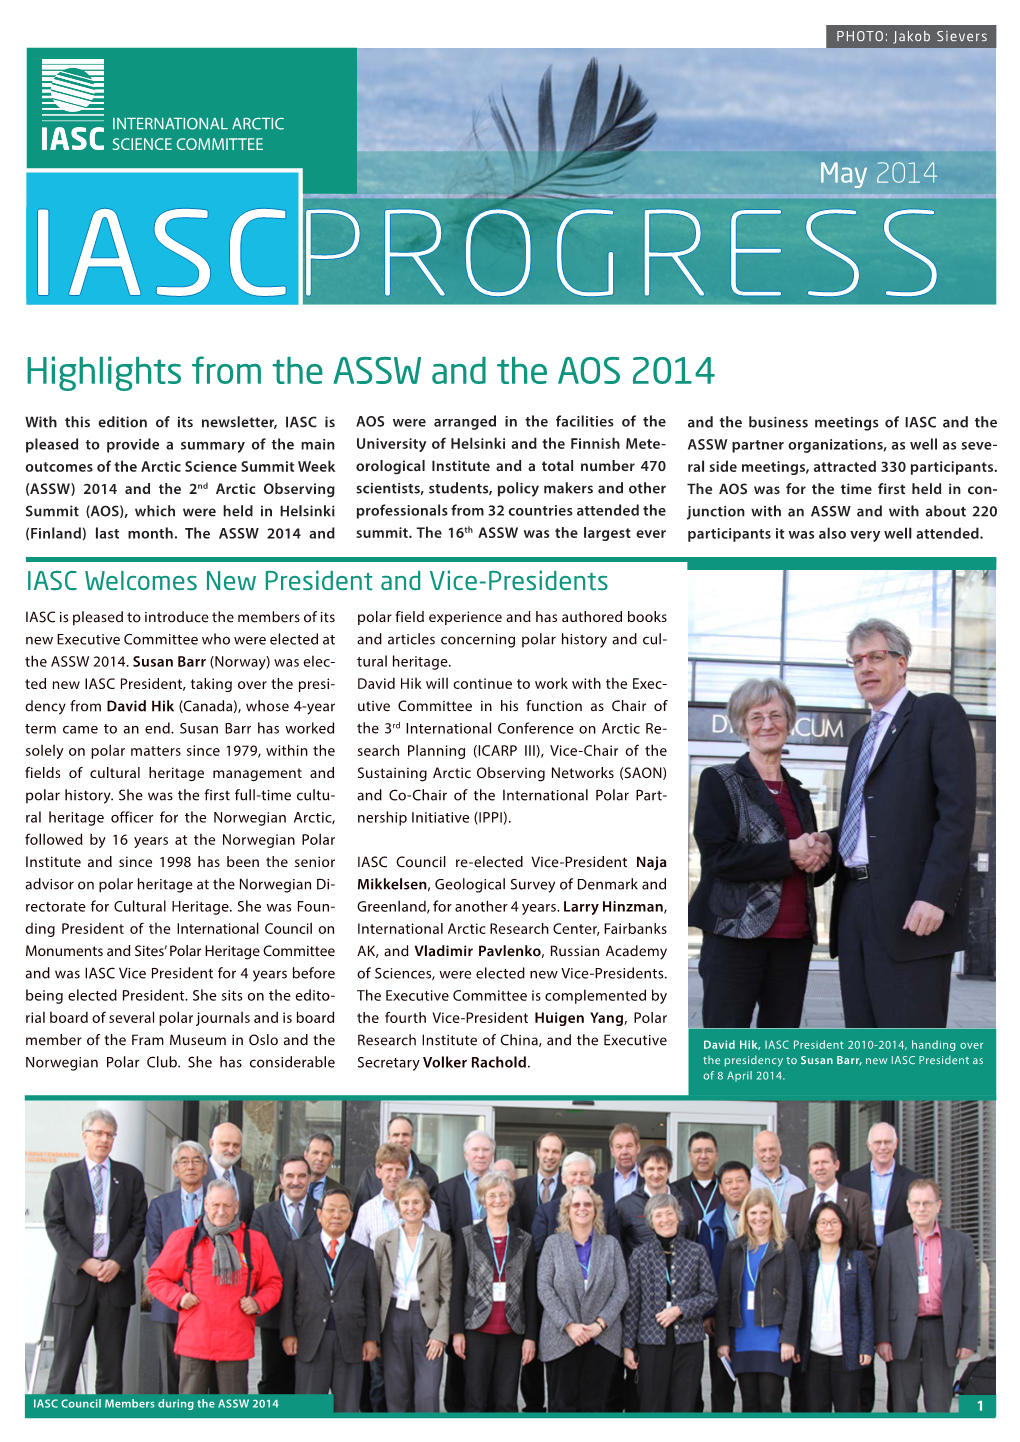 May 2014 ASSW 2014 Edition (740